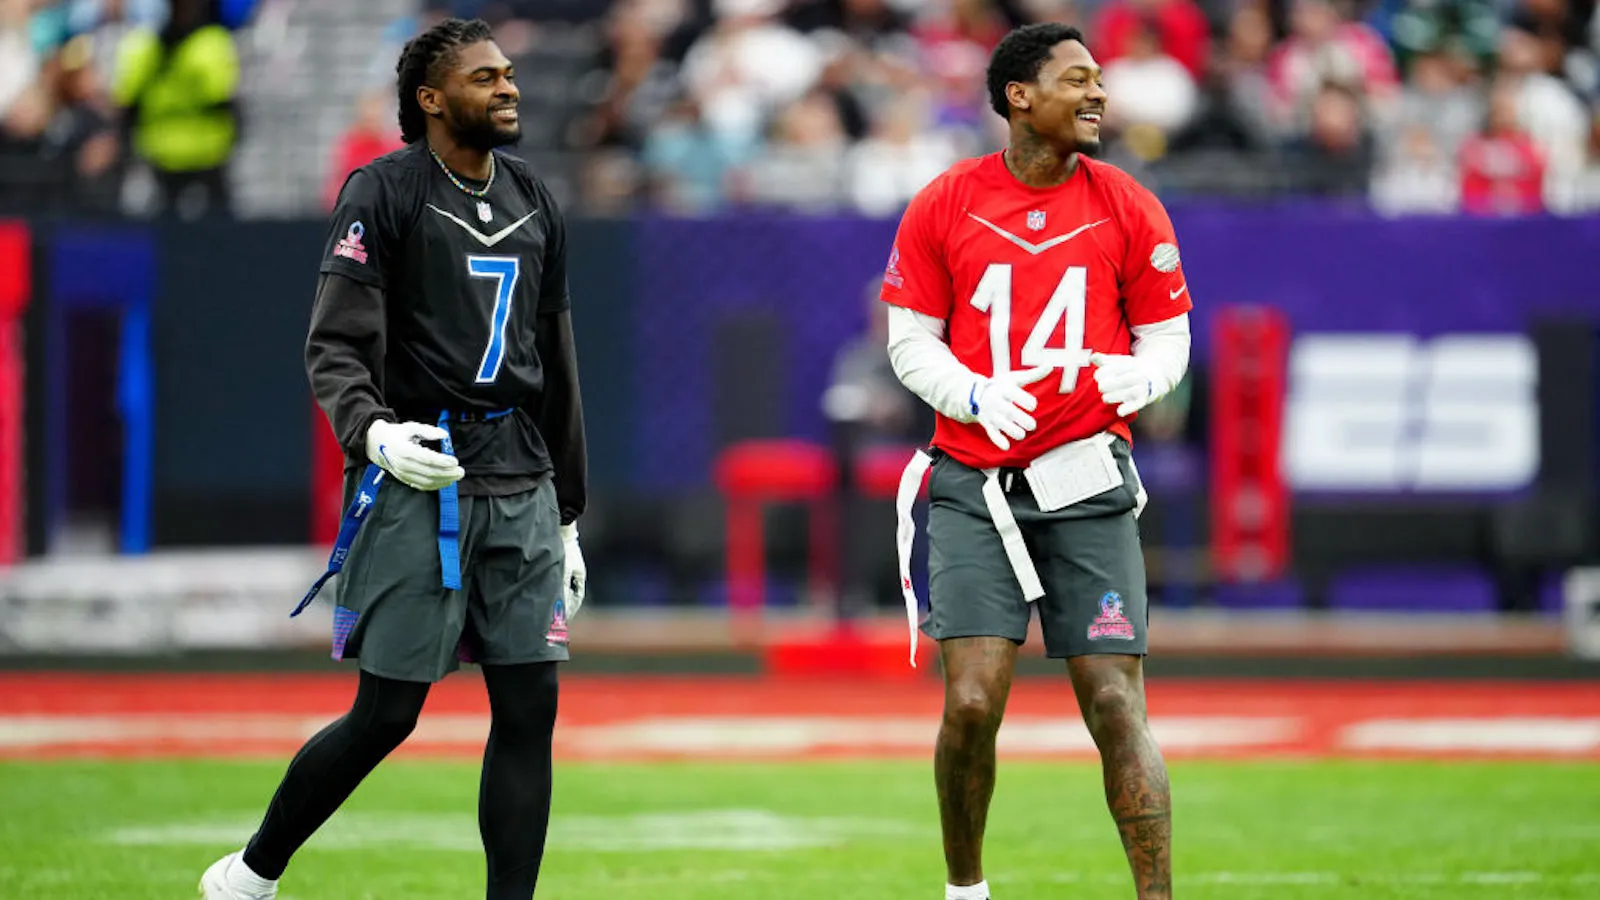 The Diggs Brothers Reunion A Blockbuster Trade Proposal That Could Shake Up the NFL